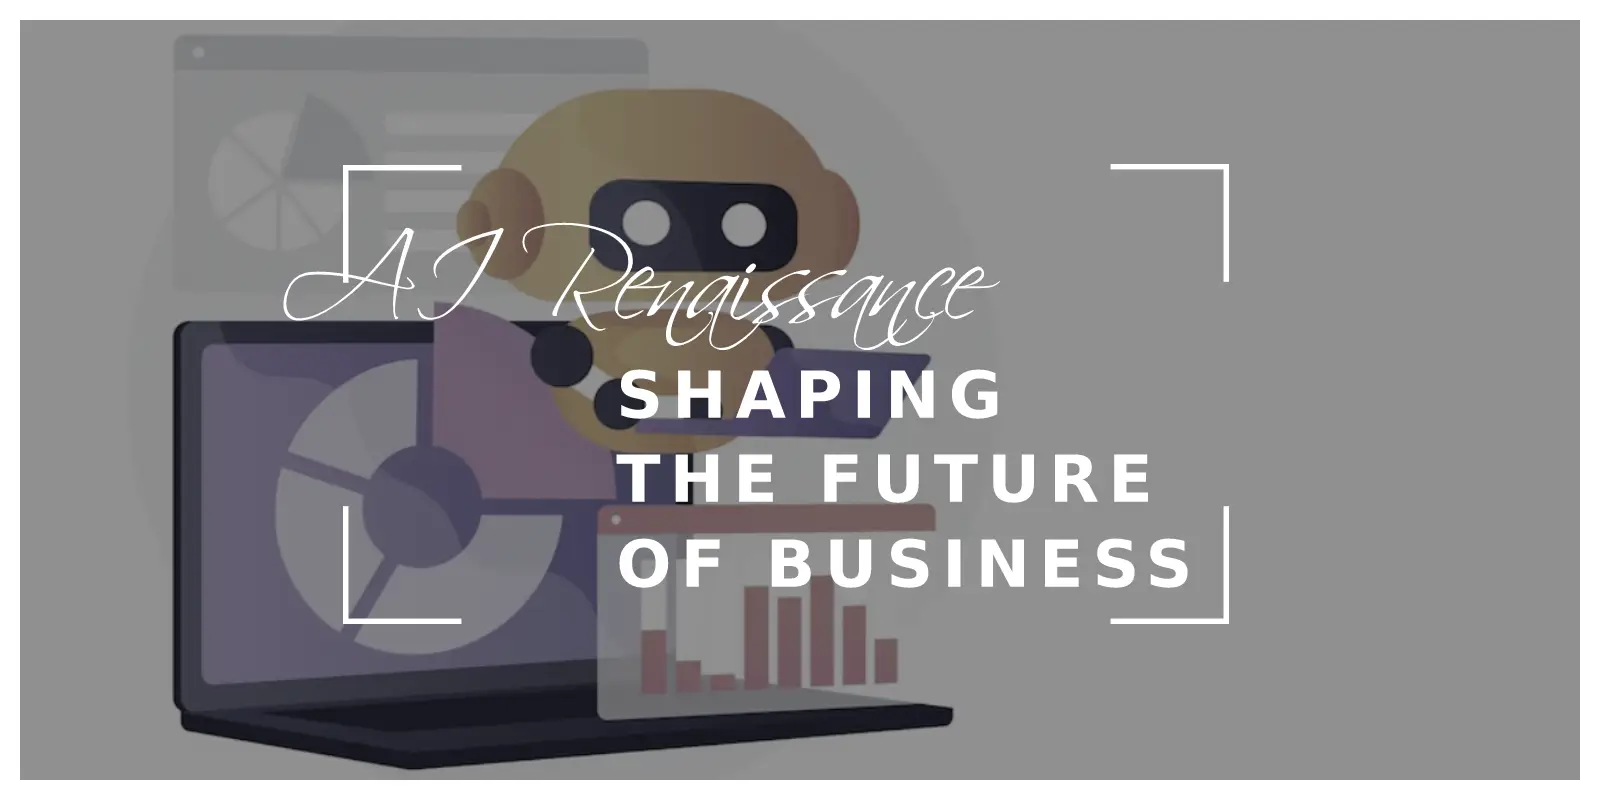 AI Renaissance: Shaping the Future of Business